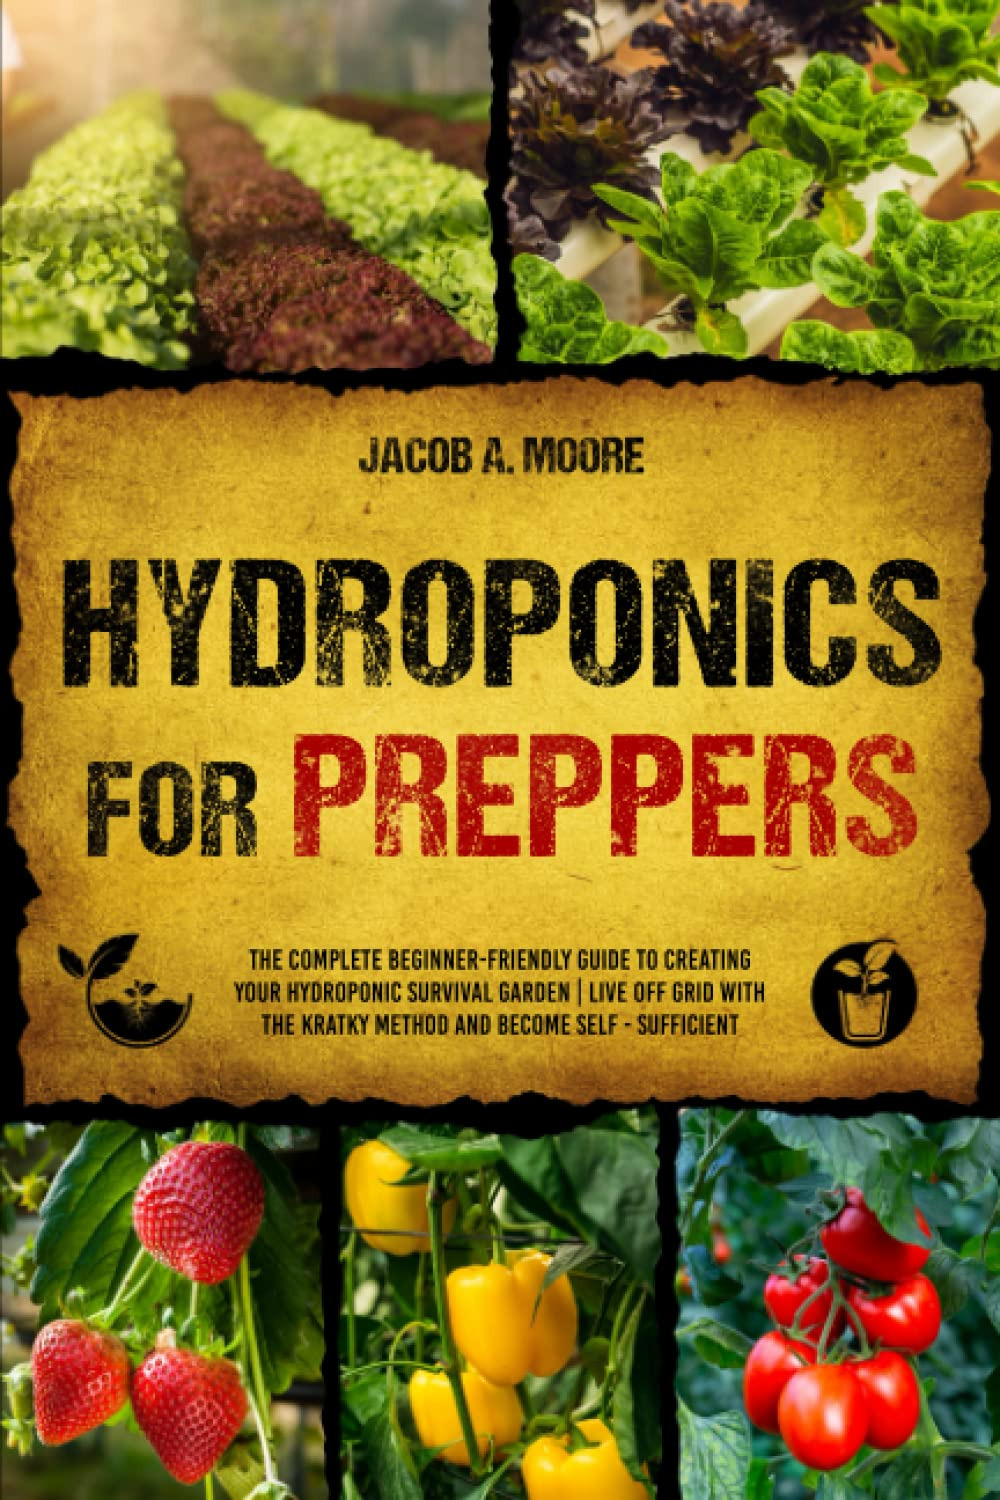 Hydroponics for Preppers: the Complete Beginner-Friendly Guide to Creating - NEW